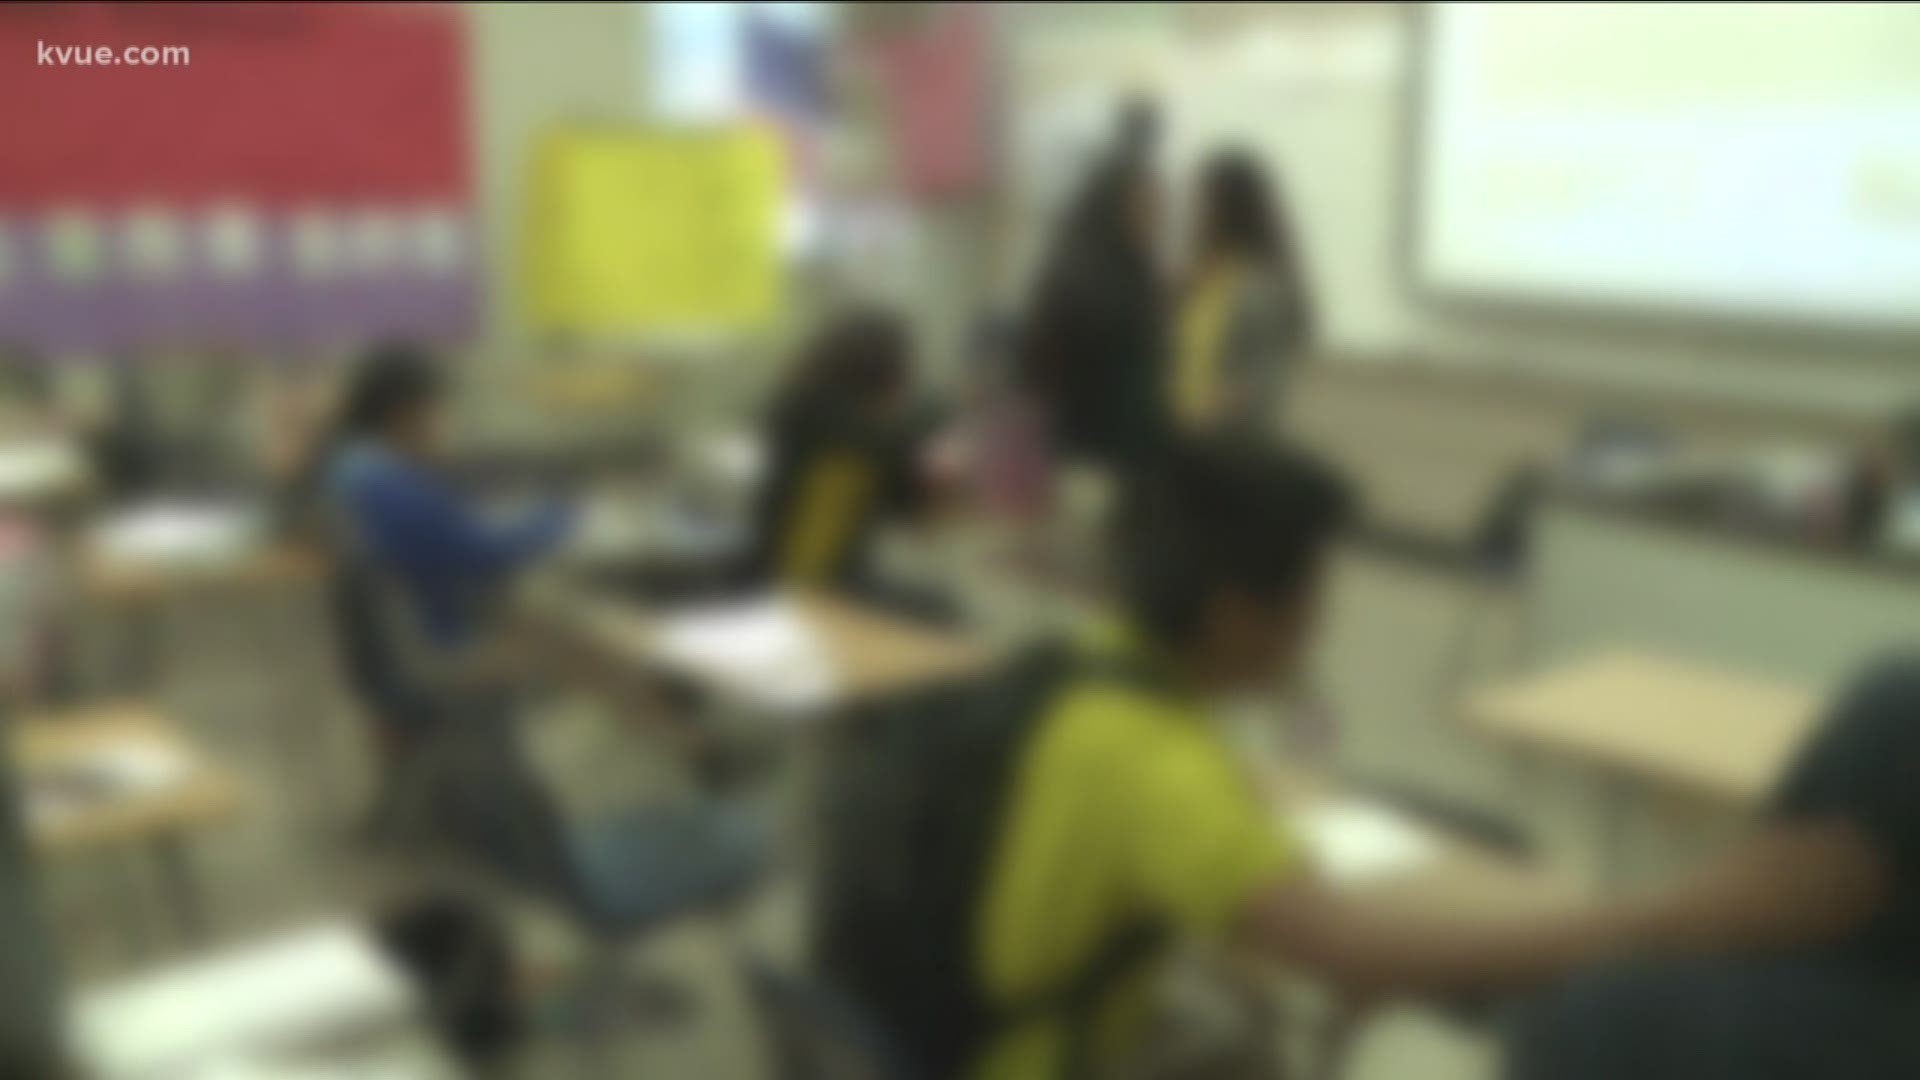 On Monday night, the Austin ISD board is discussing how sex education should be taught in its schools.